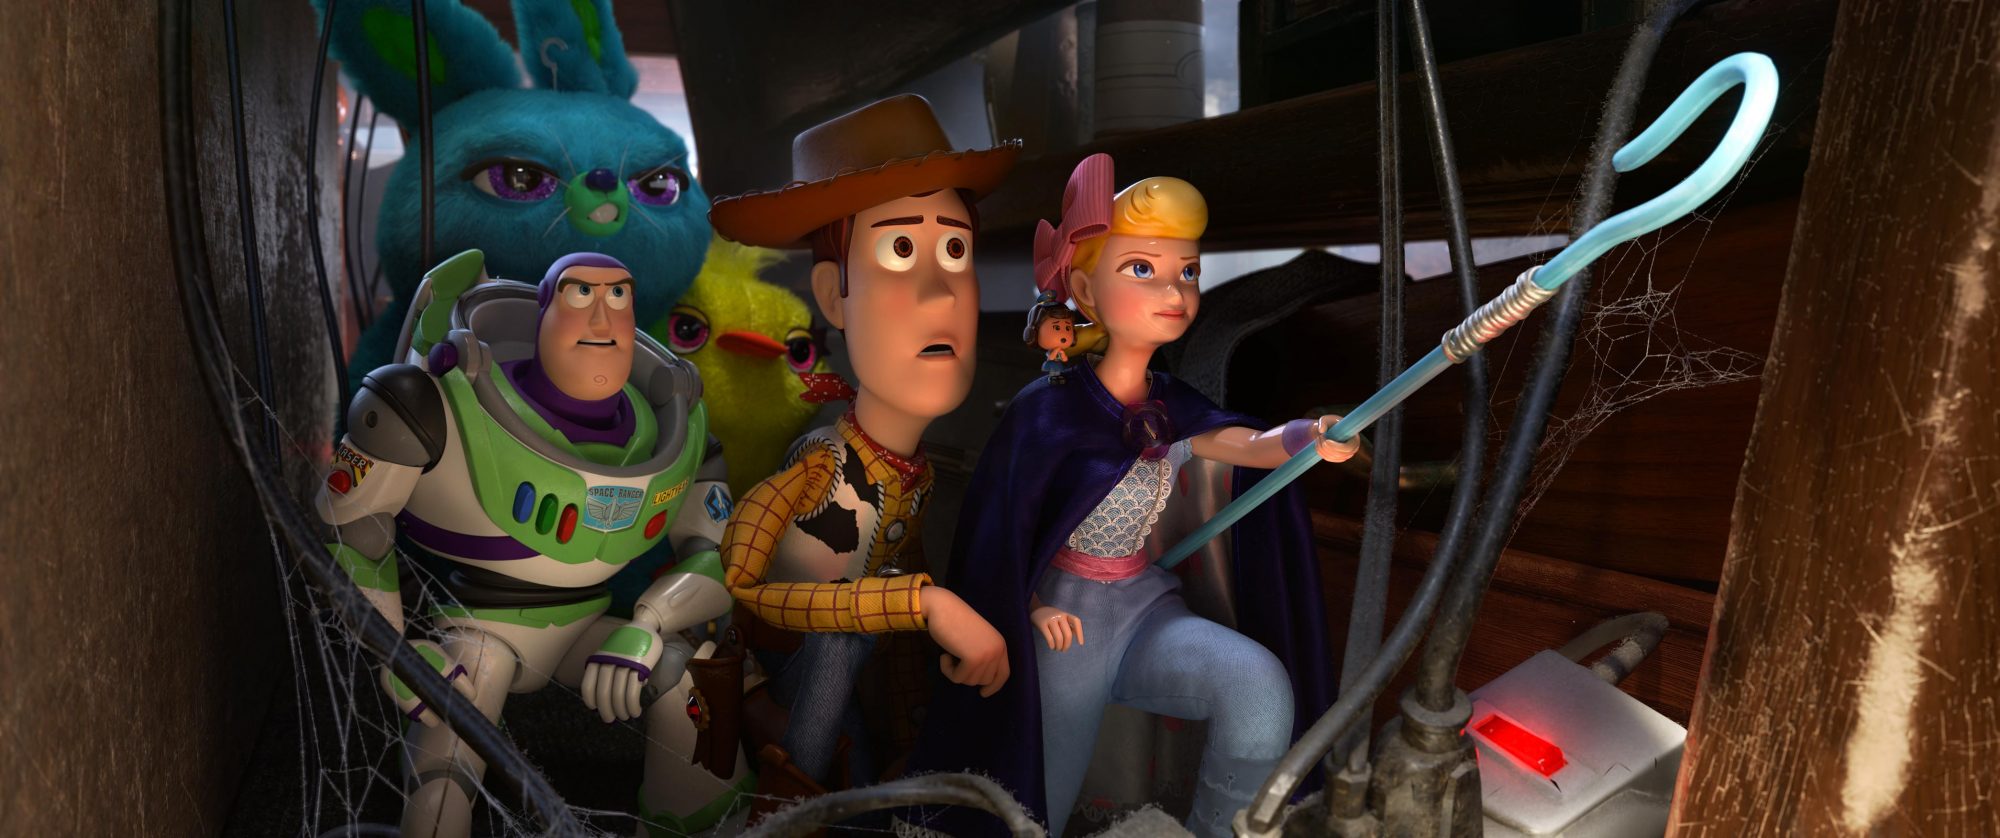 Toy Story 4 review: Pixar film goes beyond endings, with mixed results